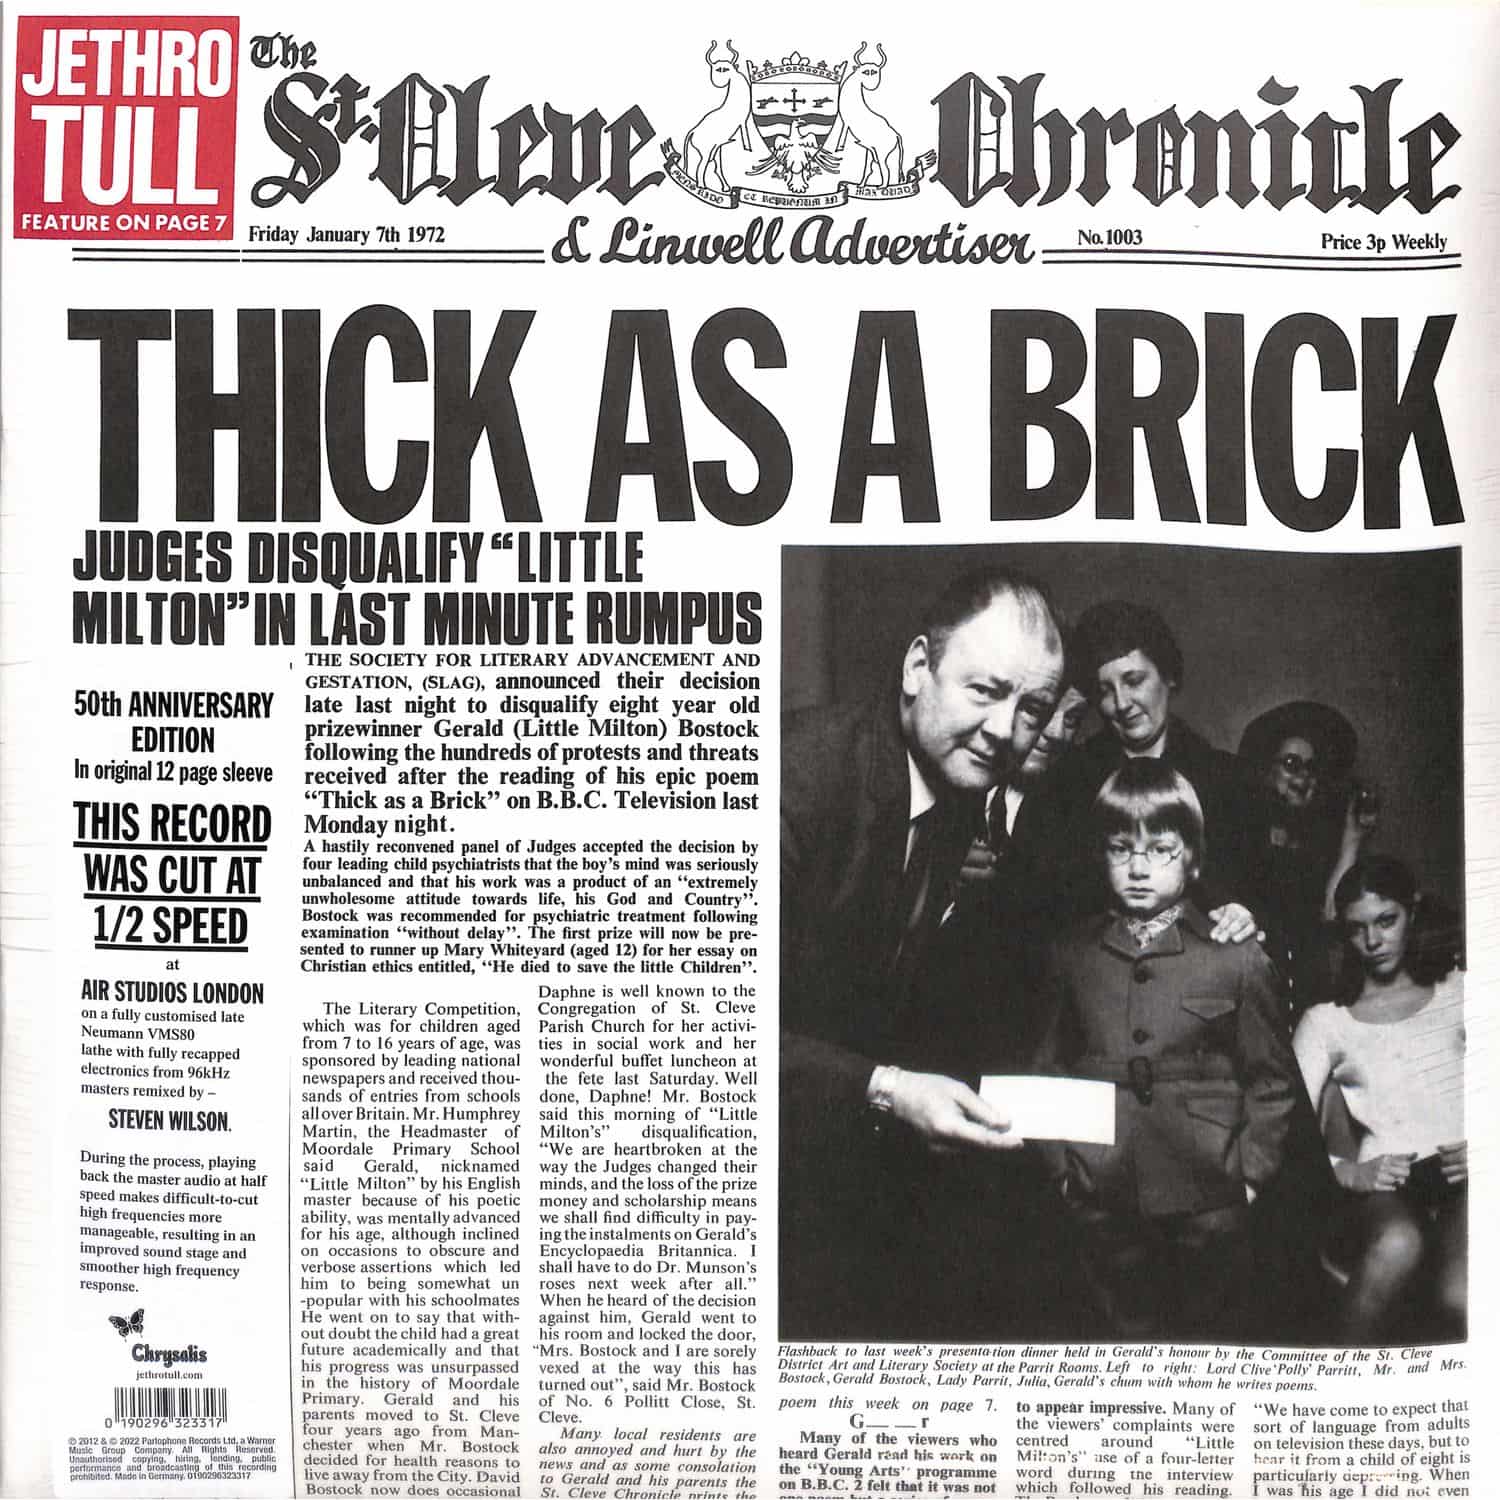 Jethro Tull - THICK AS A BRICK 